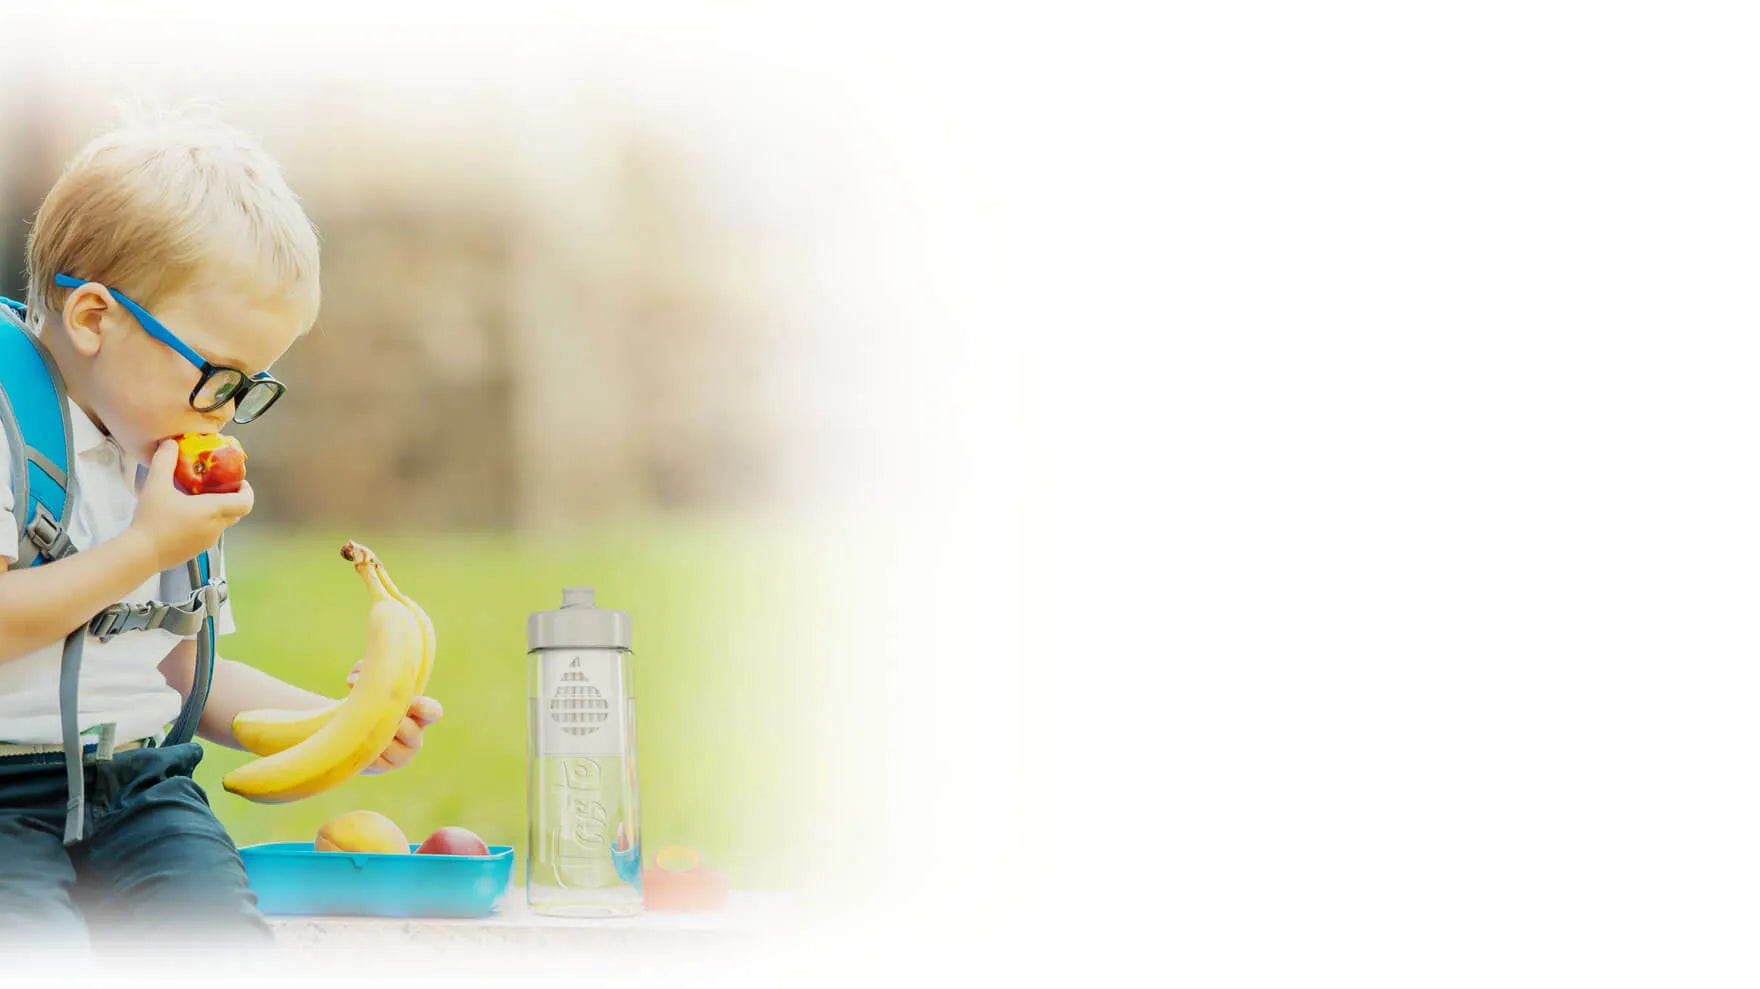 Discover the NEW! Doulton TASTE Water Filter Bottle